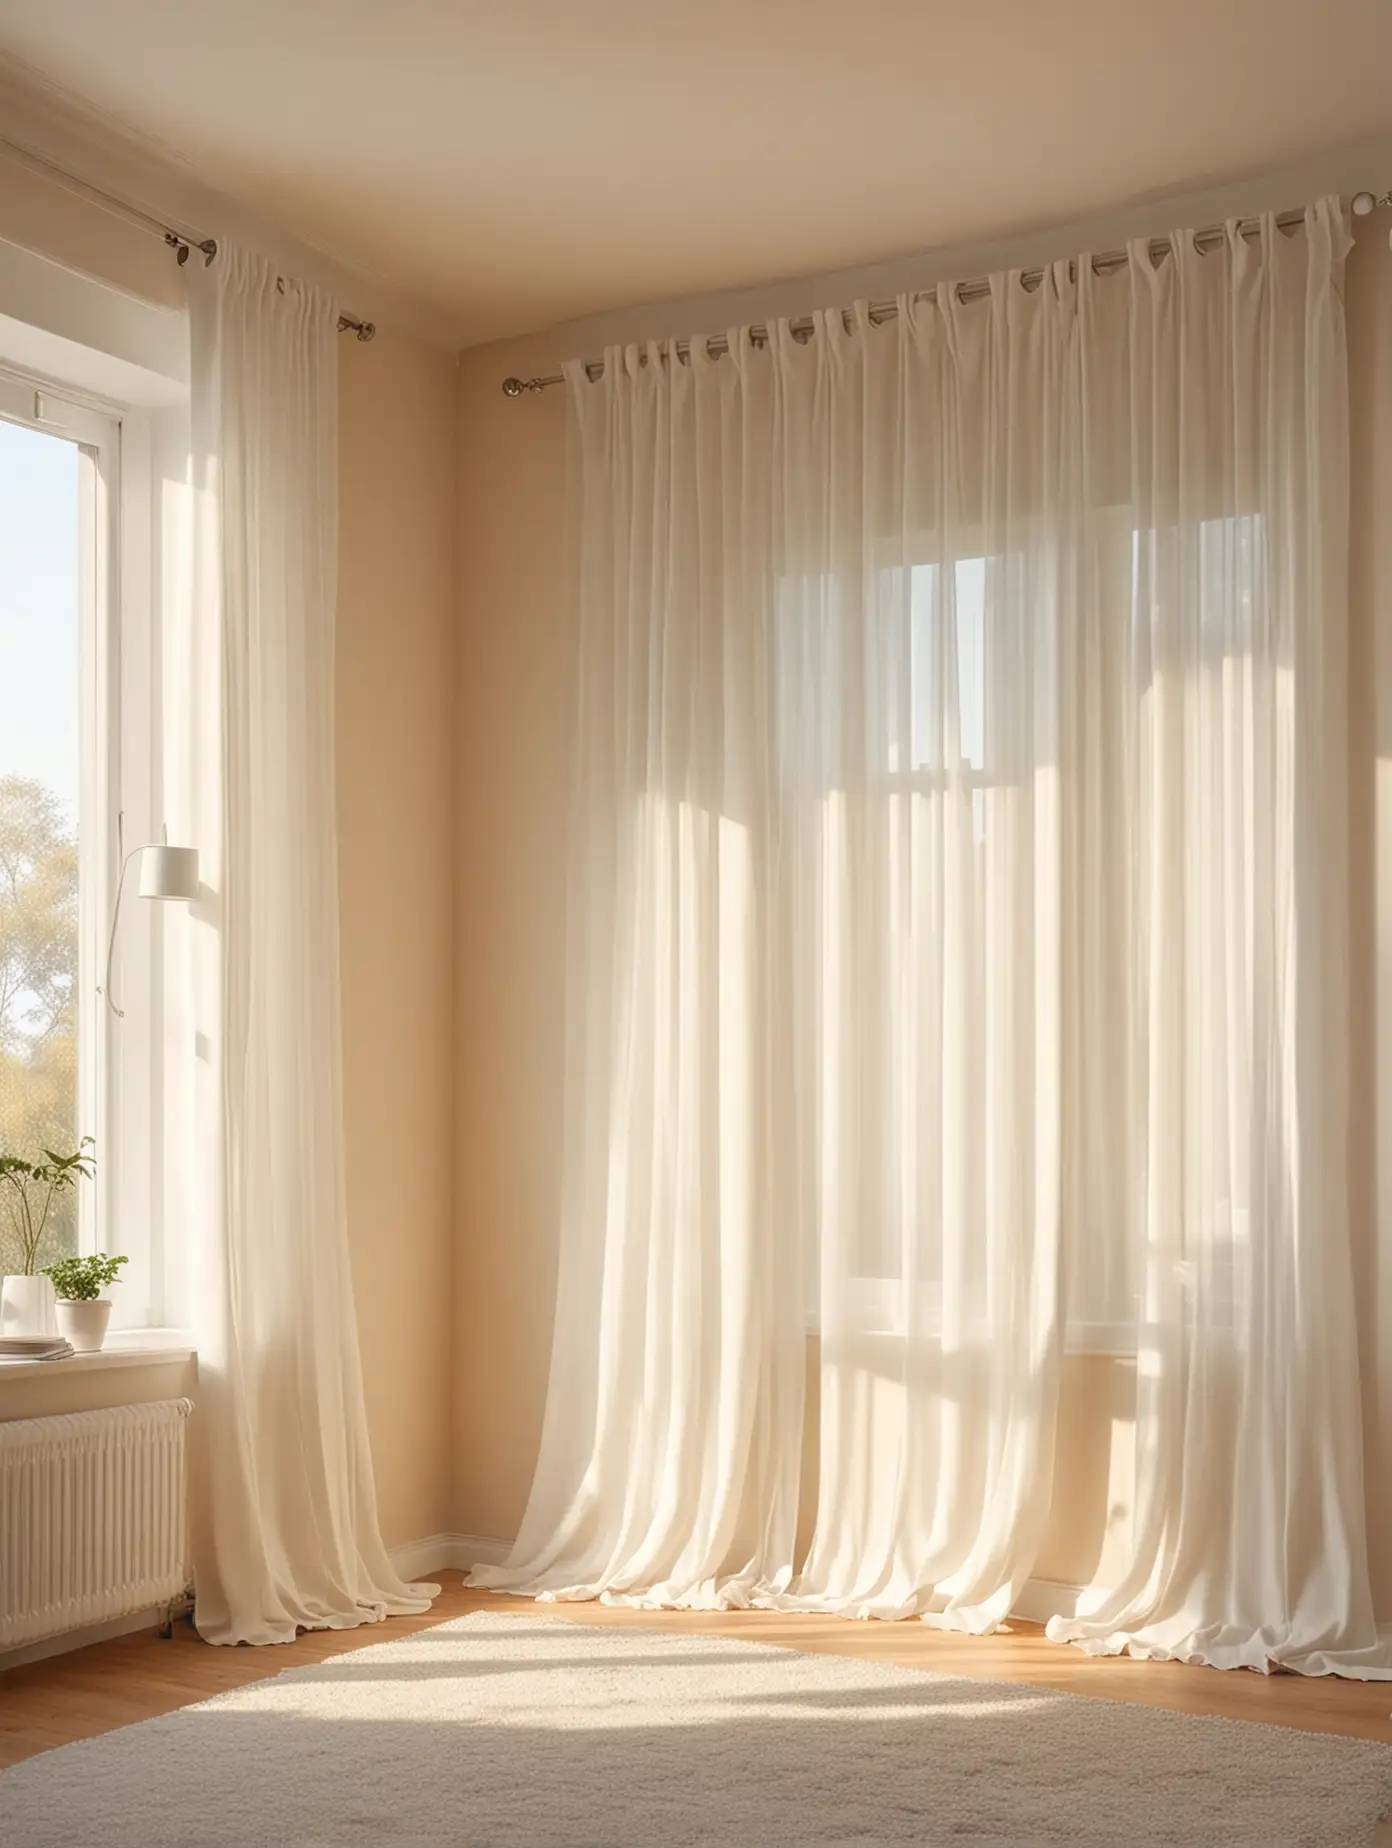 comfortable family scene, warm wall color, white window curtains falling on the wall, sunlight shining on it